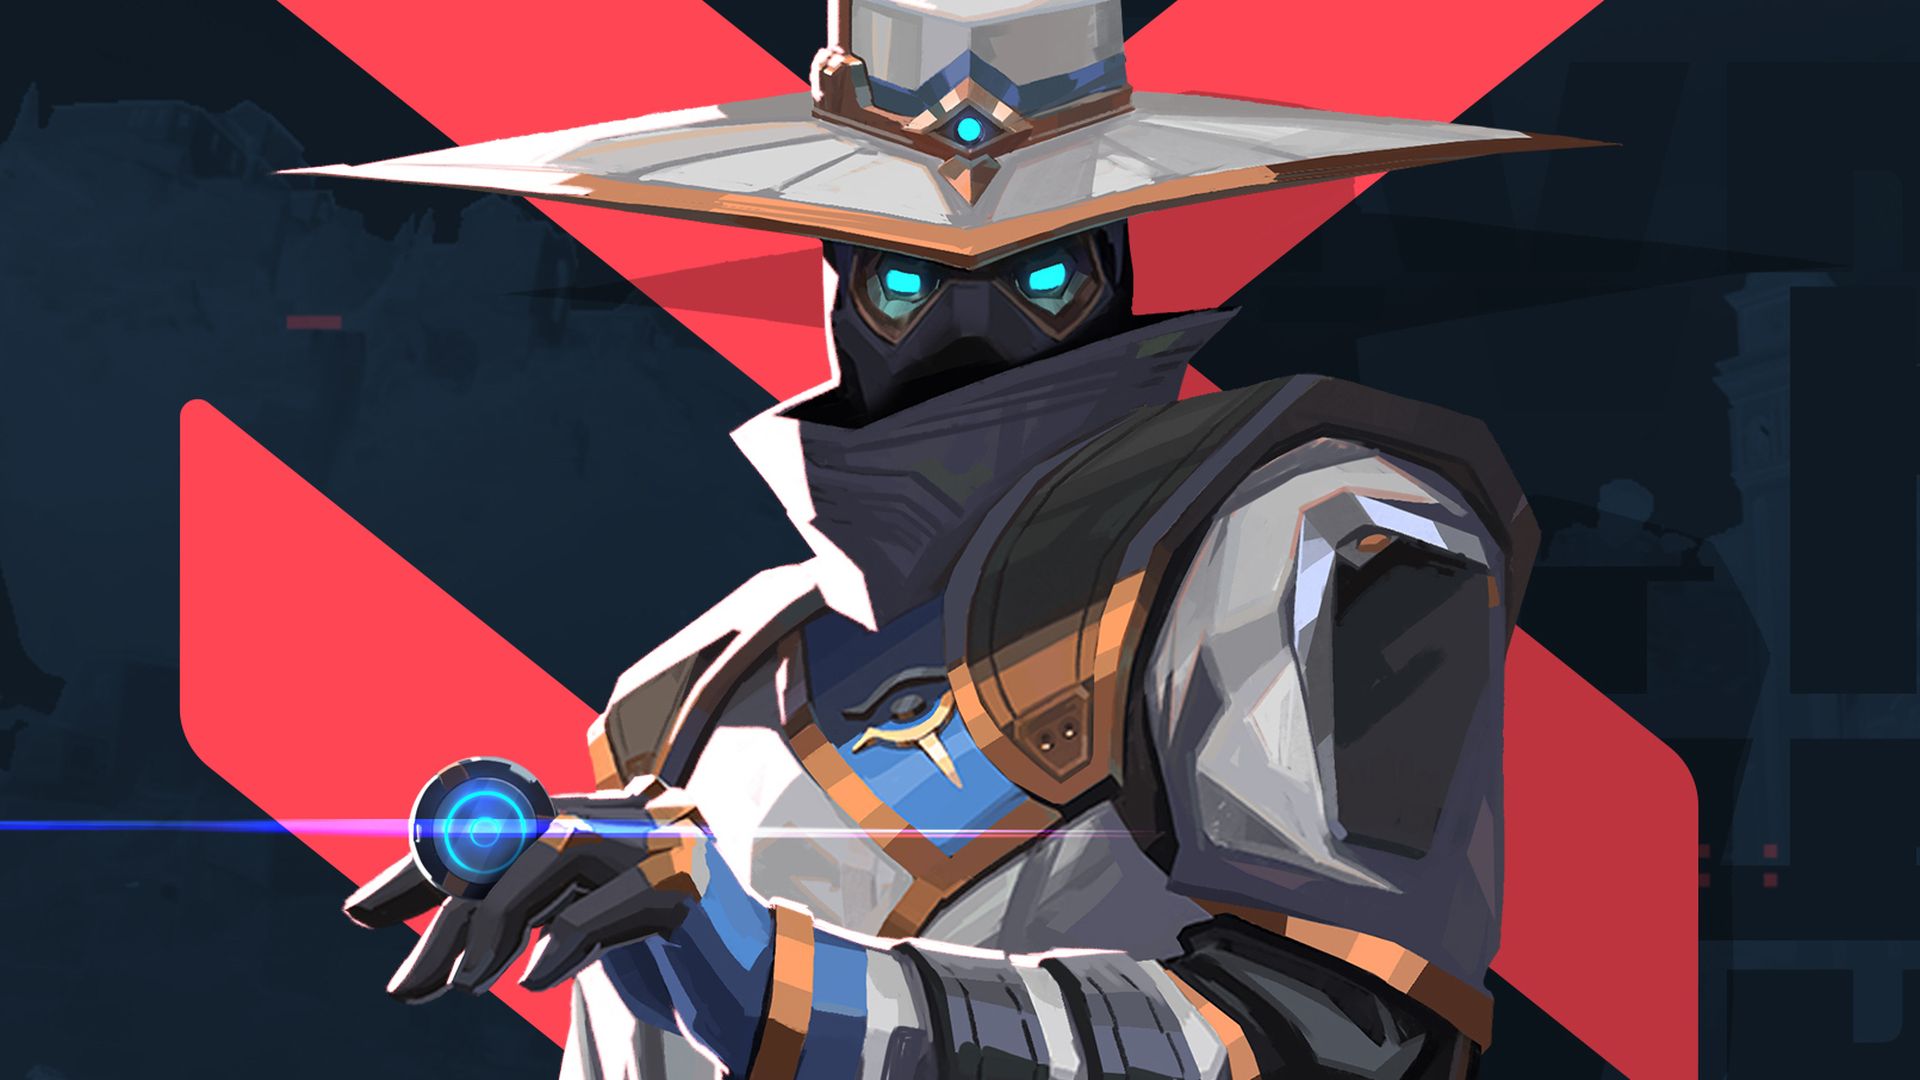 Close-up illustration of a humanoid video game character in a white wide-brimmed hat. 